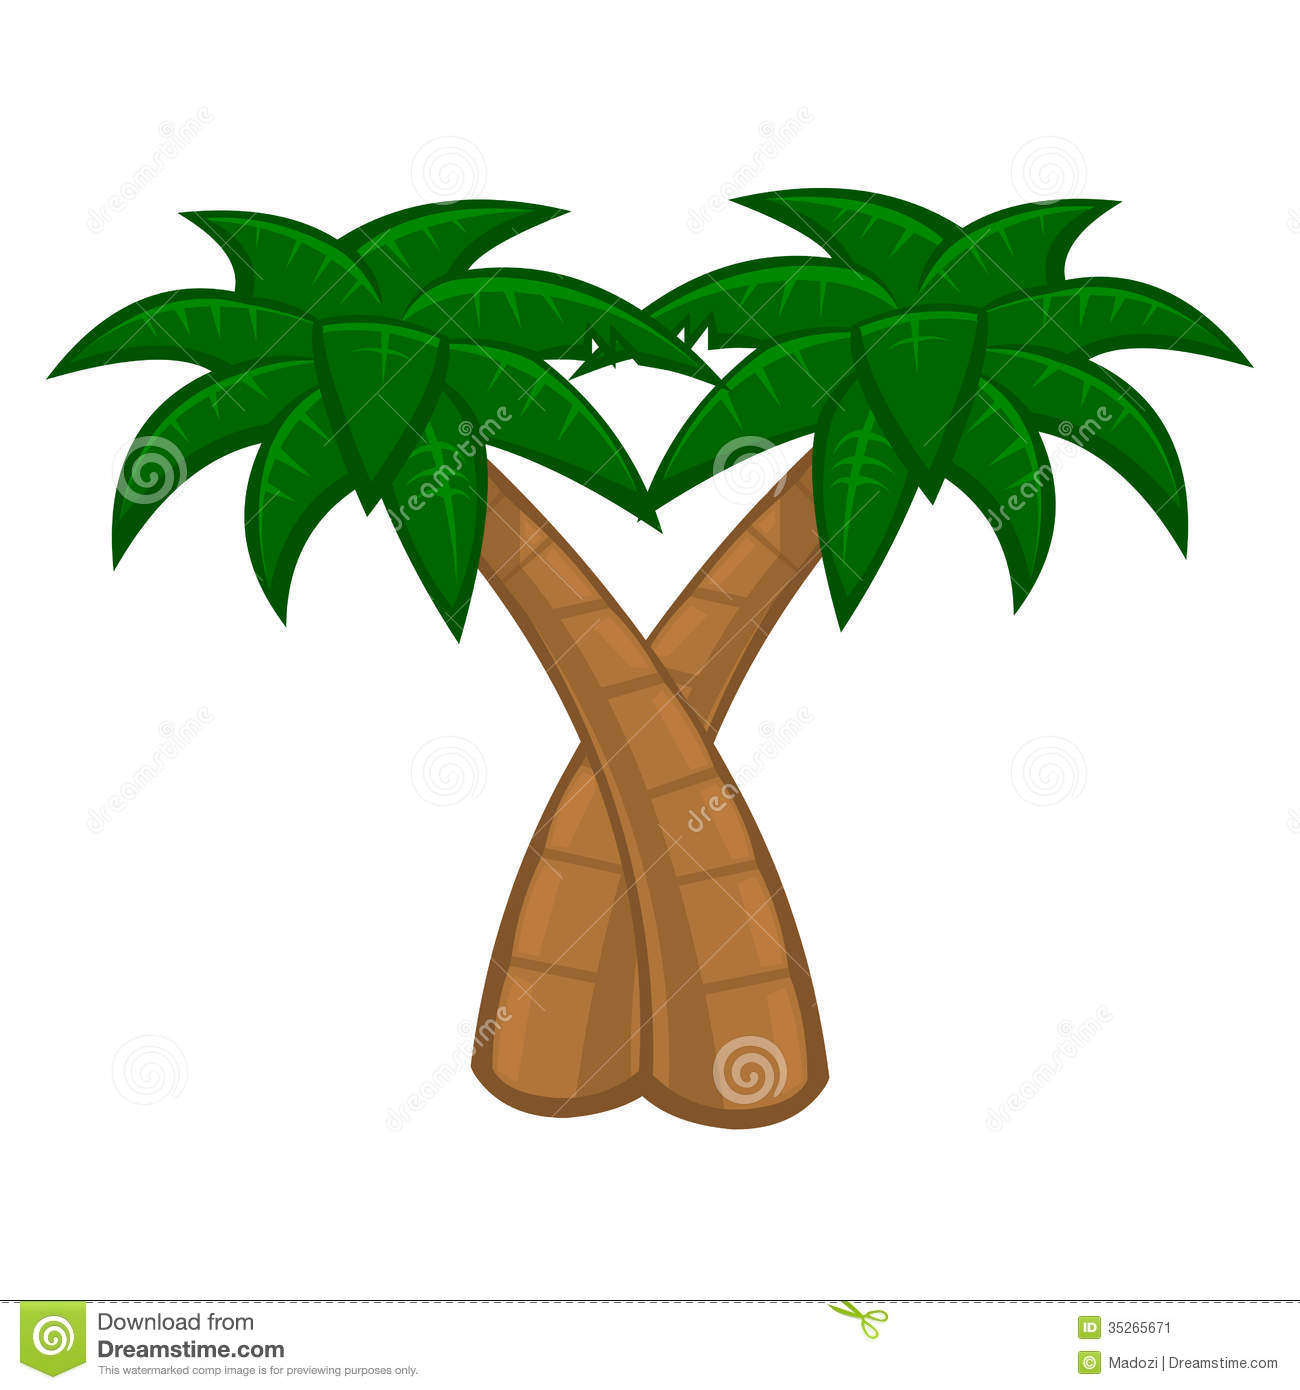 Palm Tree Clipart No Background   Clipart Panda   Free Clipart Images